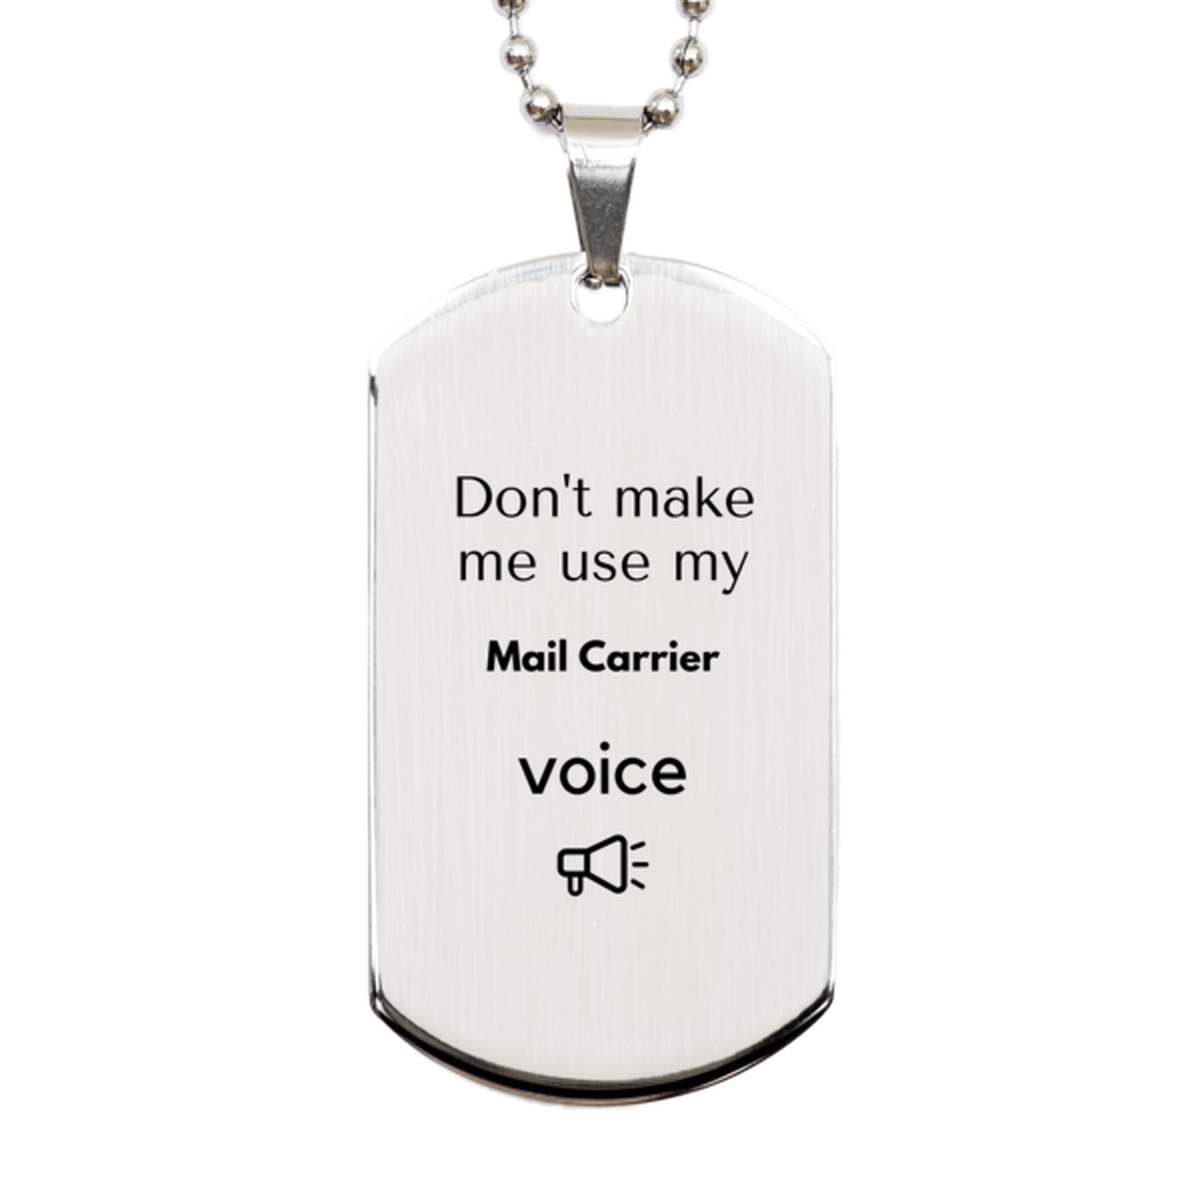 Don't make me use my Mail Carrier voice, Sarcasm Mail Carrier Gifts, Christmas Mail Carrier Silver Dog Tag Birthday Unique Gifts For Mail Carrier Coworkers, Men, Women, Colleague, Friends